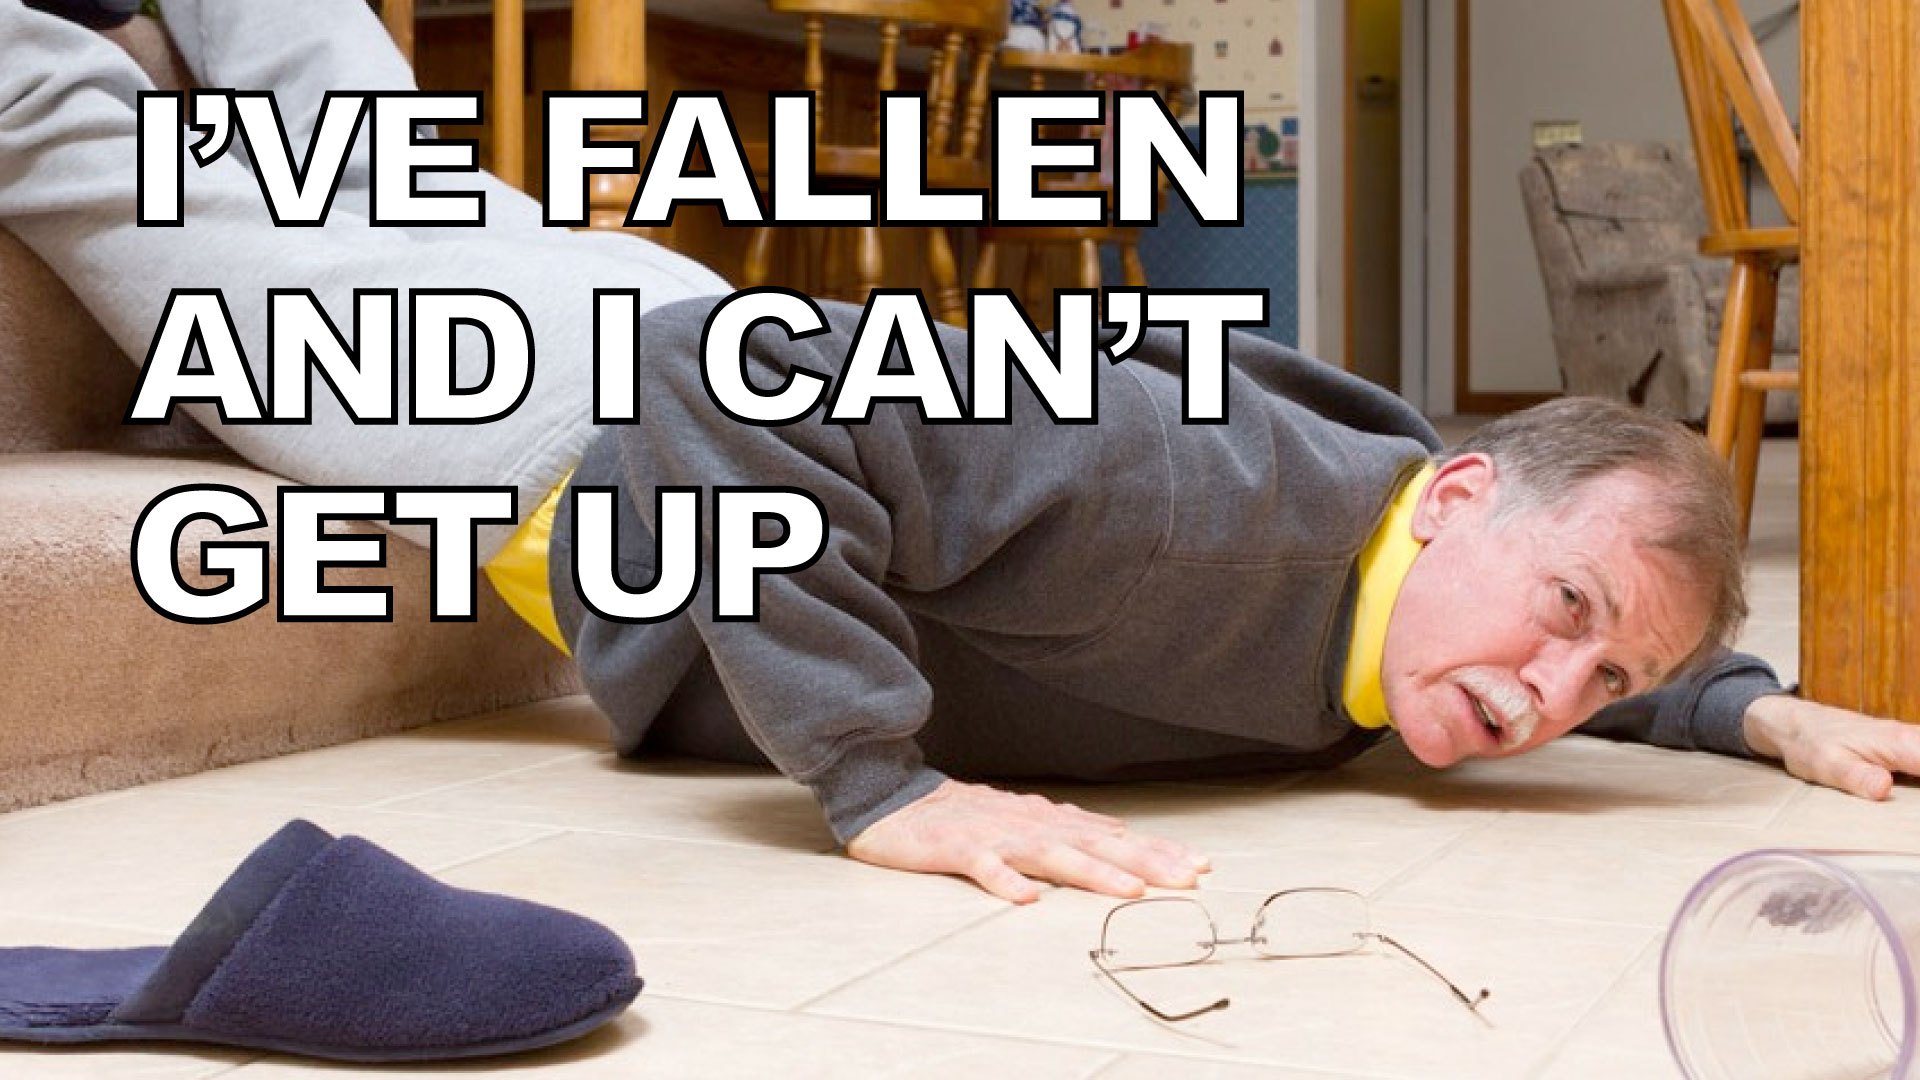 I’ve fallen and I can’t get up.” 